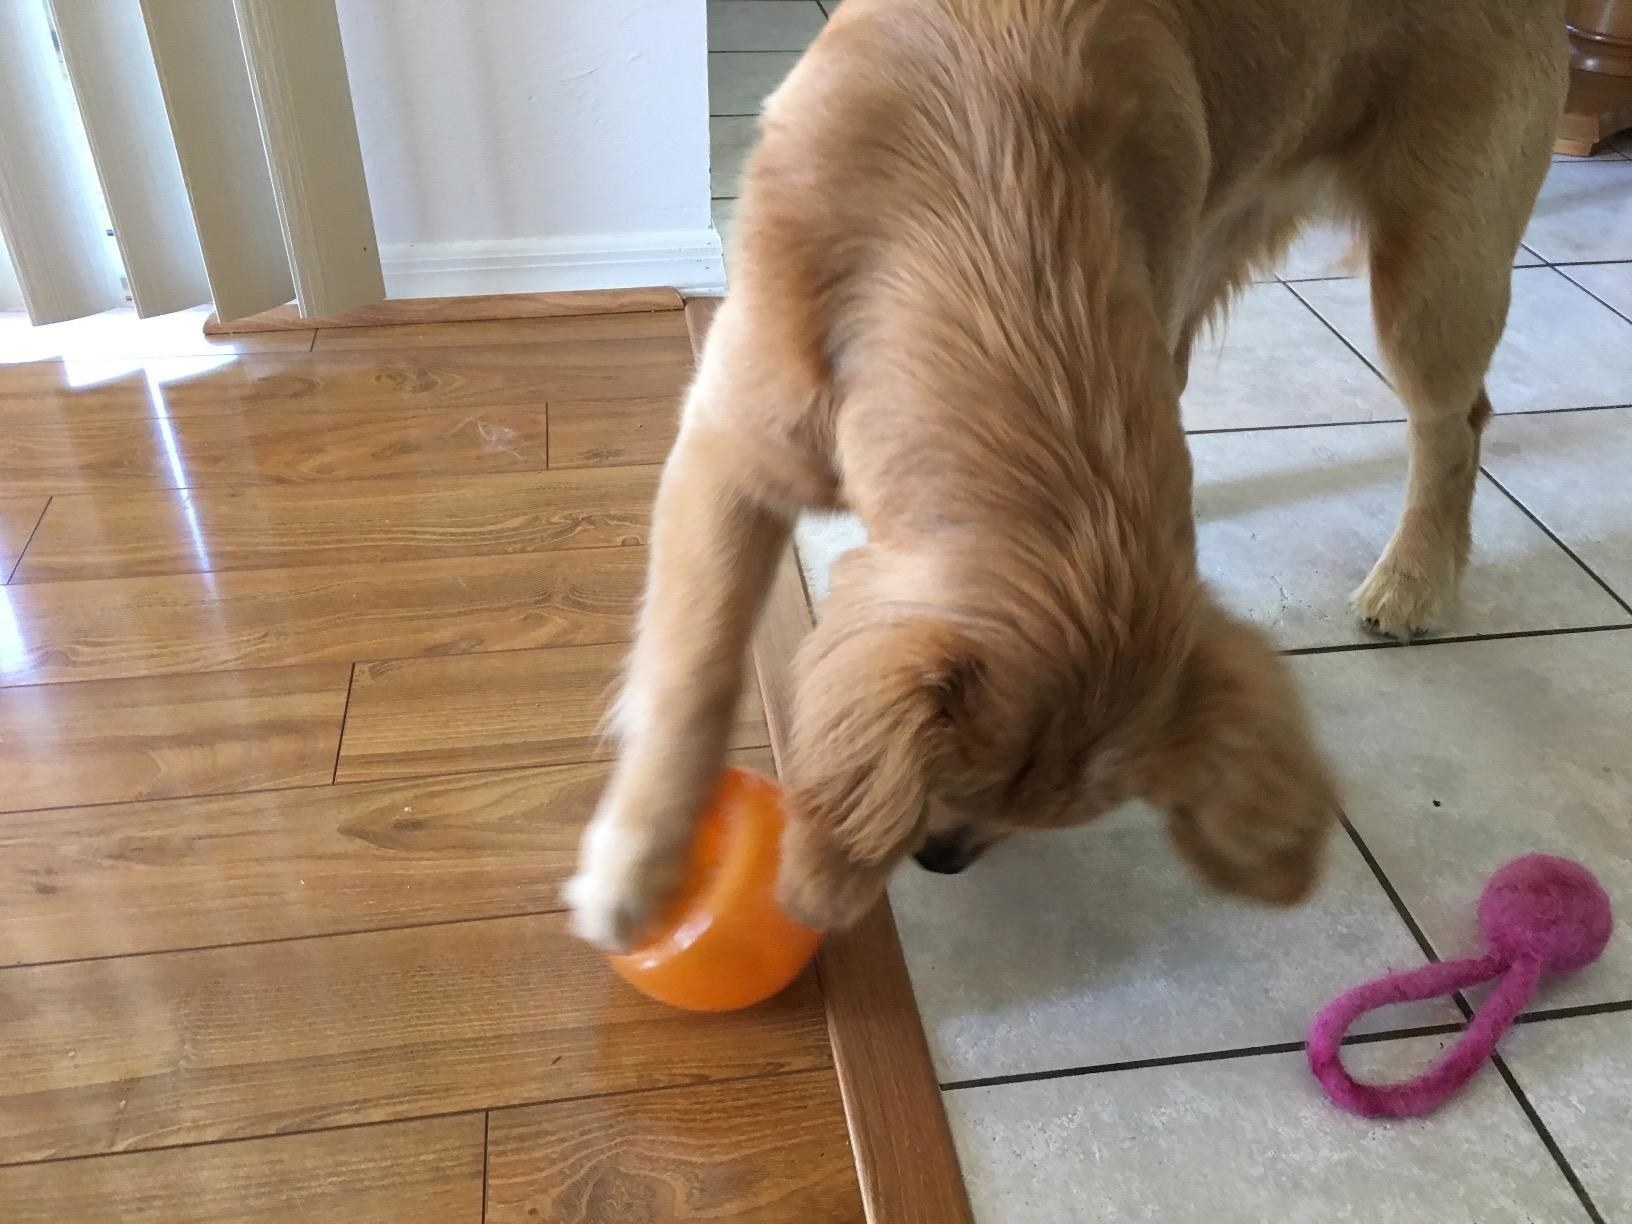 A dog plays with the toy, which is shaped like half of a traditional round ball